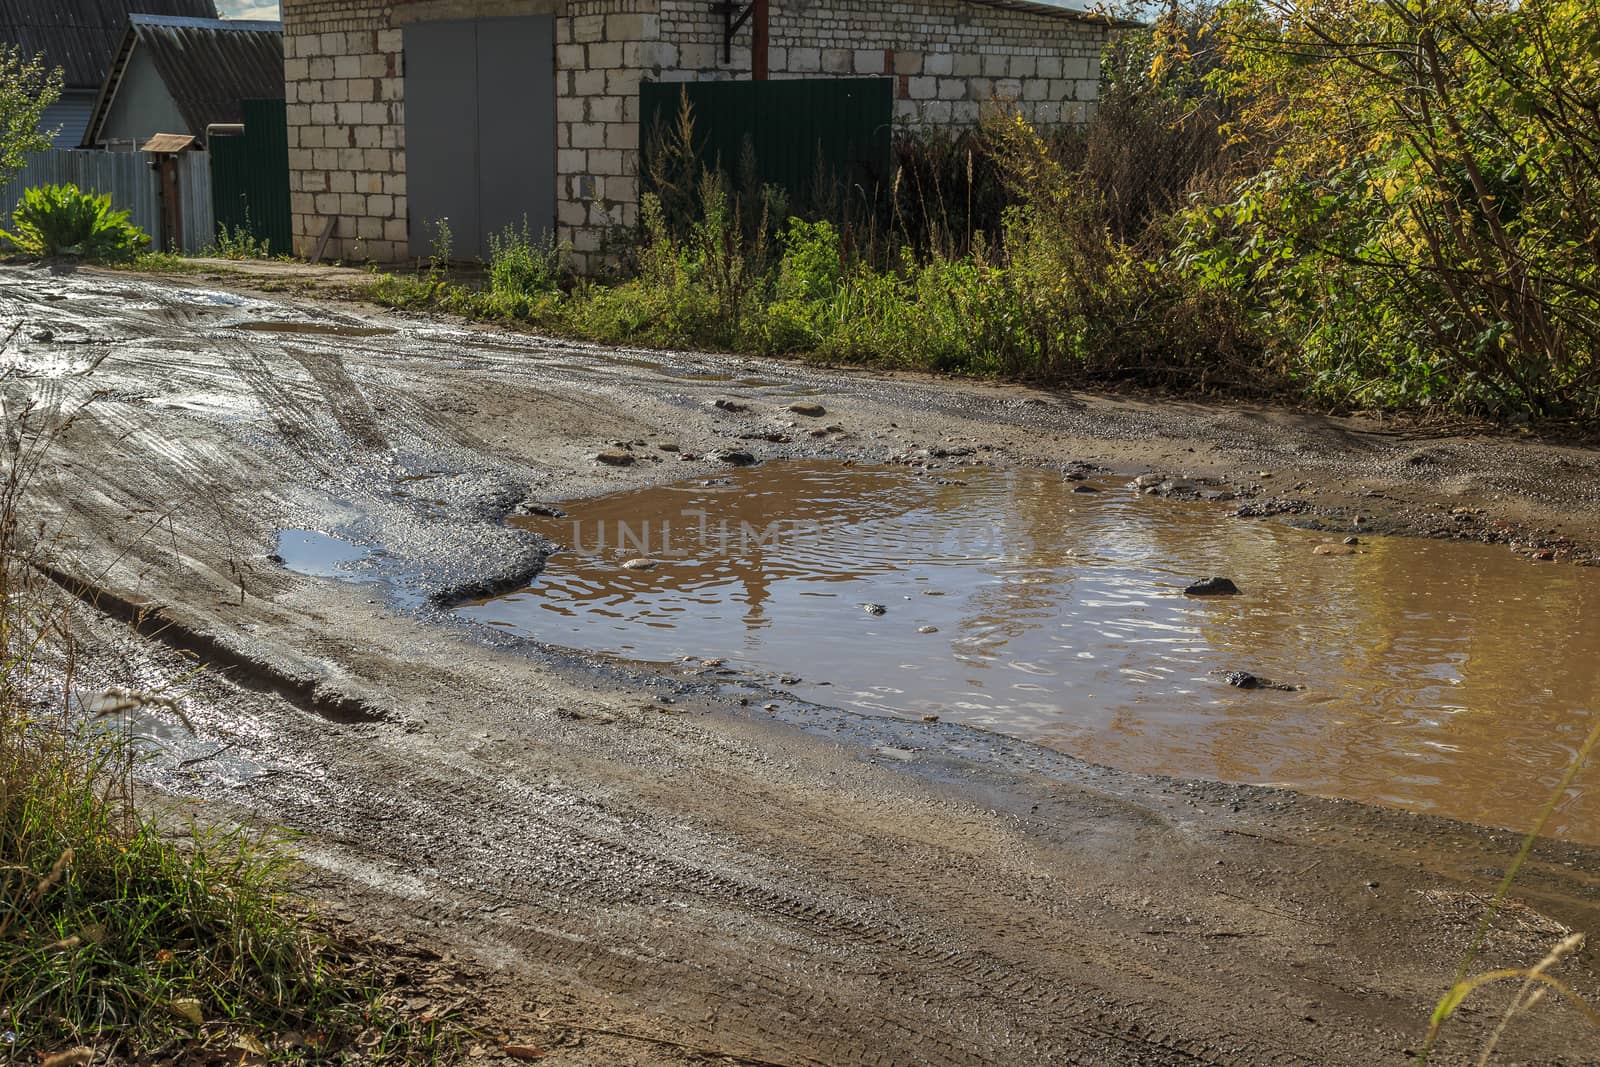 roadway in a provincial Russian city in poor condition, pits and dirt